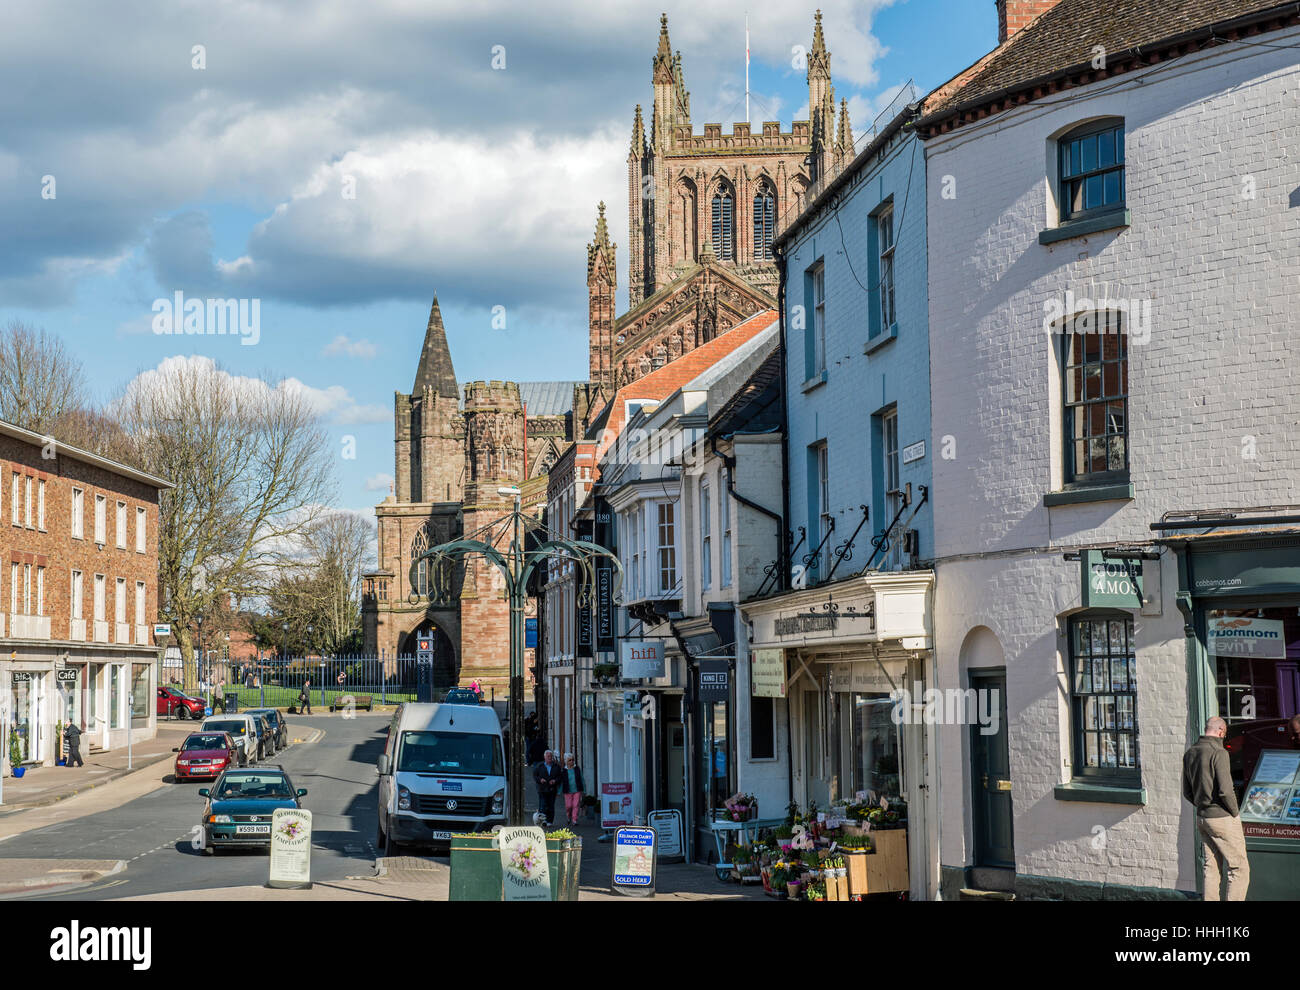 King Street in Hereford Town, Herefordshire, England, showing part of Hereford Cathedral Stock Photo